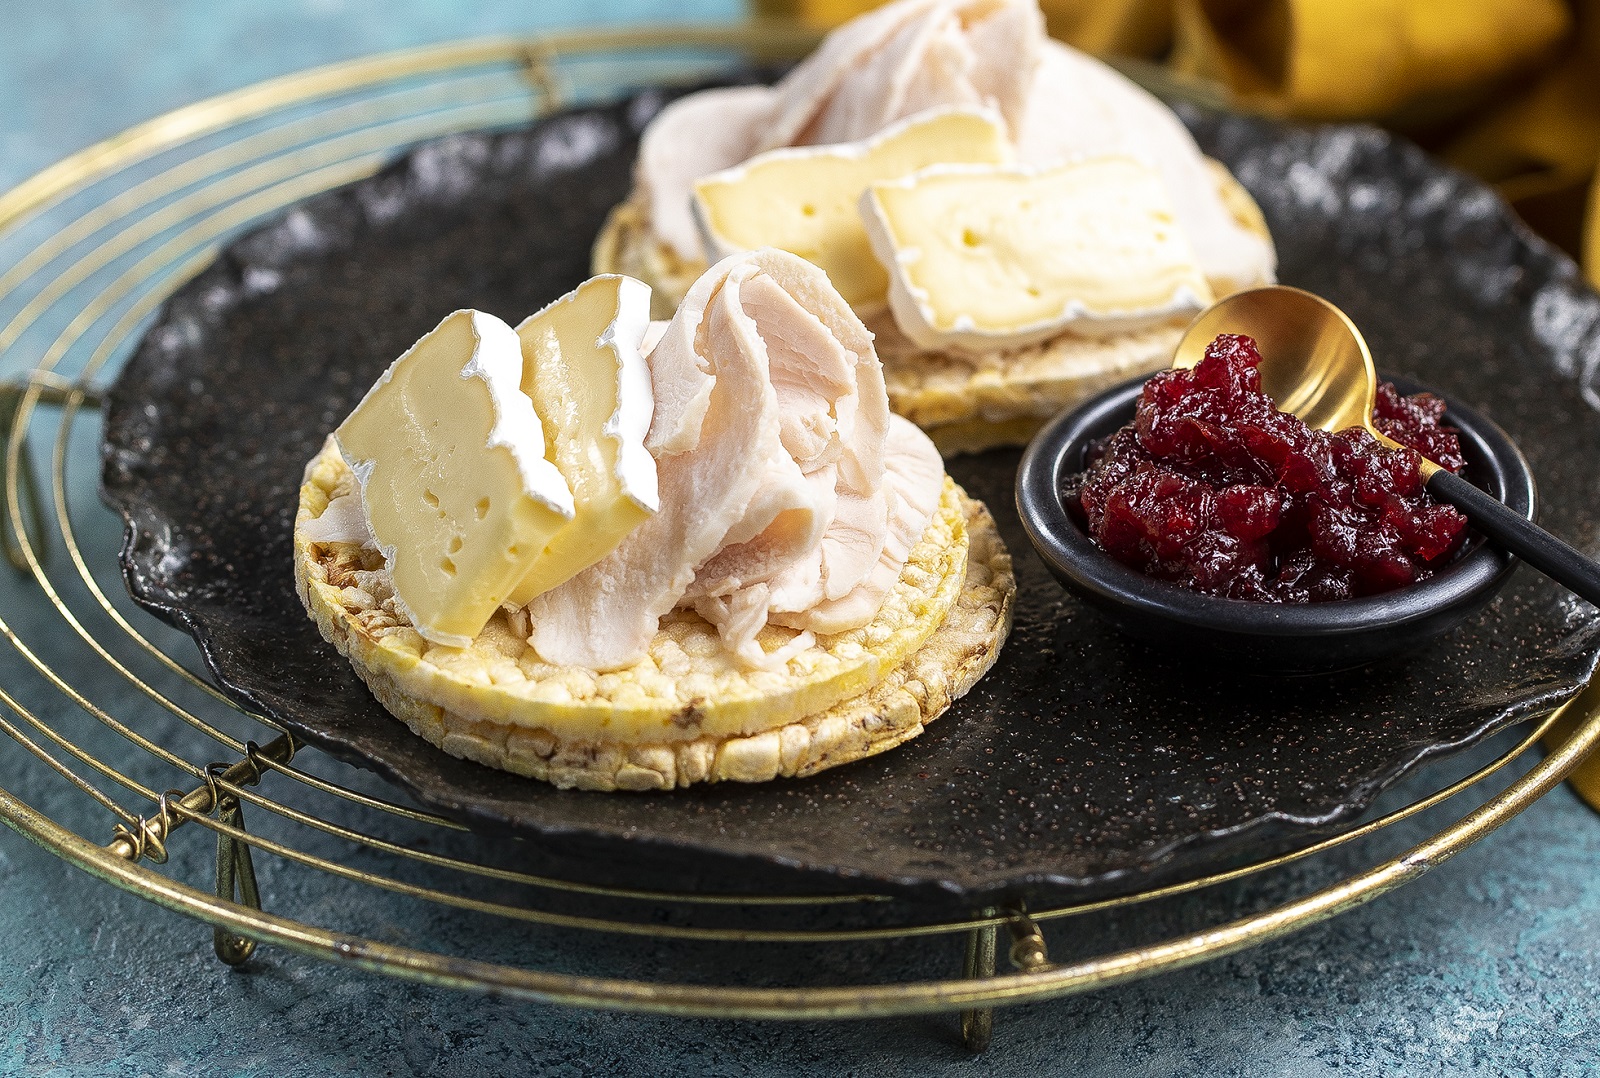 Smoked Chicken, Brie & Cranberry Sauce on CORN THINS slices